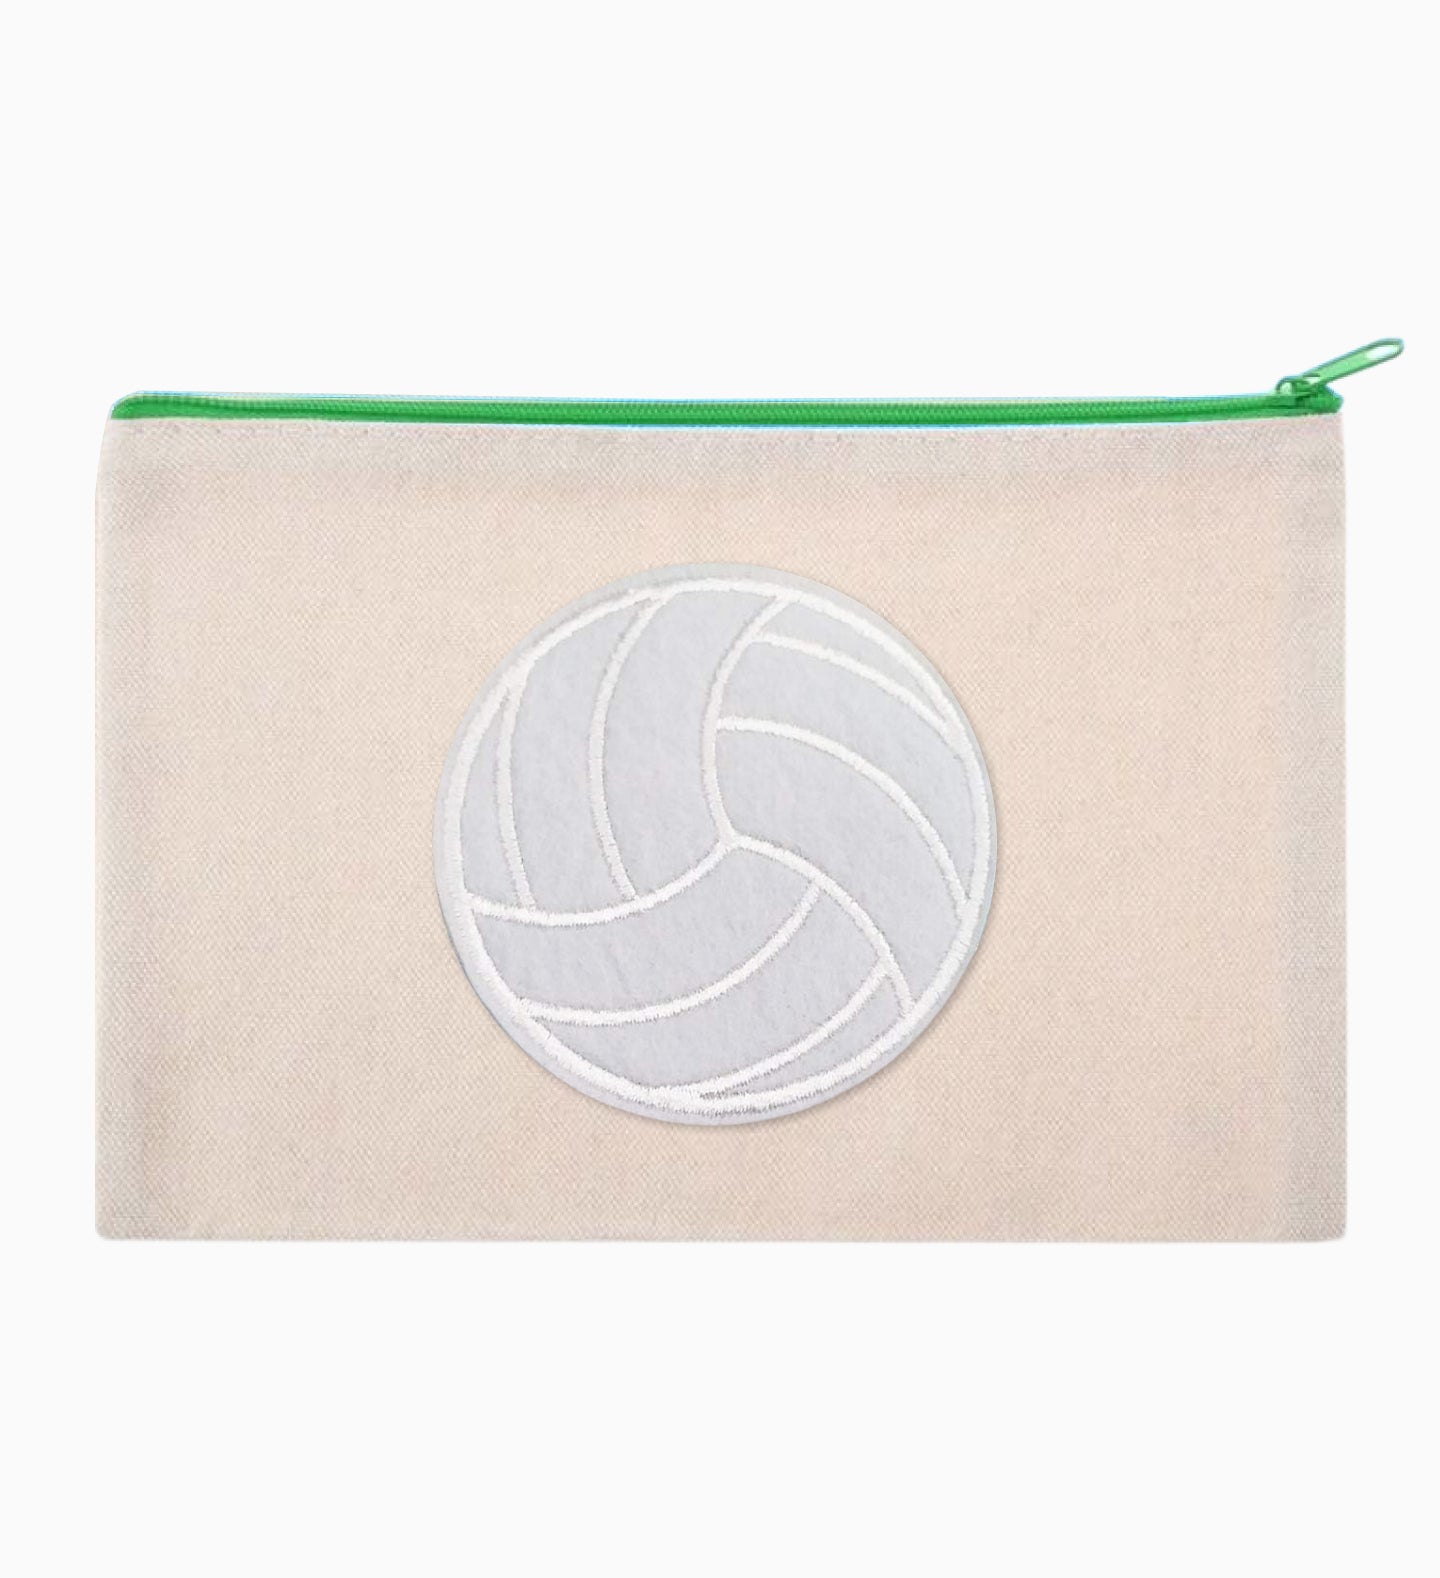 Volleyball Patch Travel/Toiletry/Cosmetic Bag